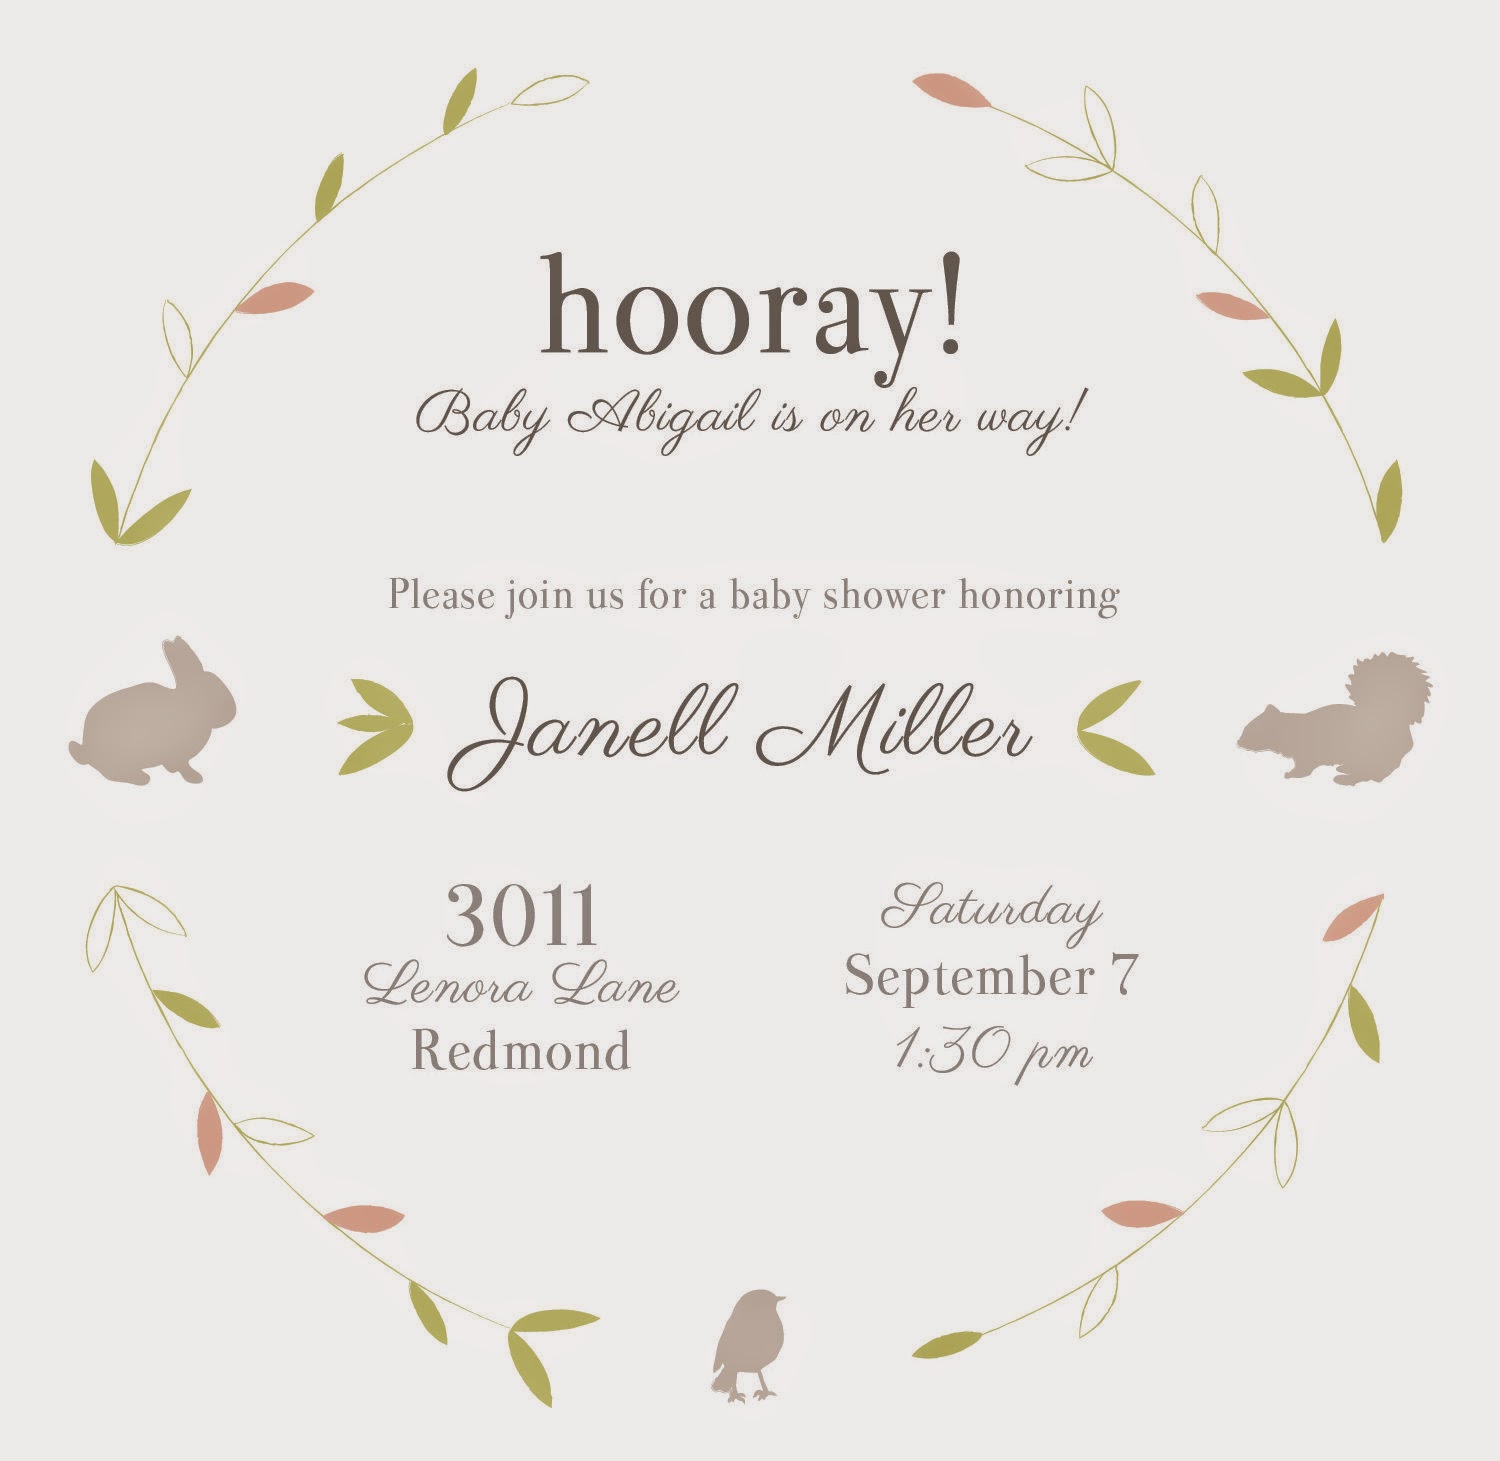 https://www.etsy.com/listing/208750985/baby-shower-invitation-template-sweet?ref=shop_home_active_9